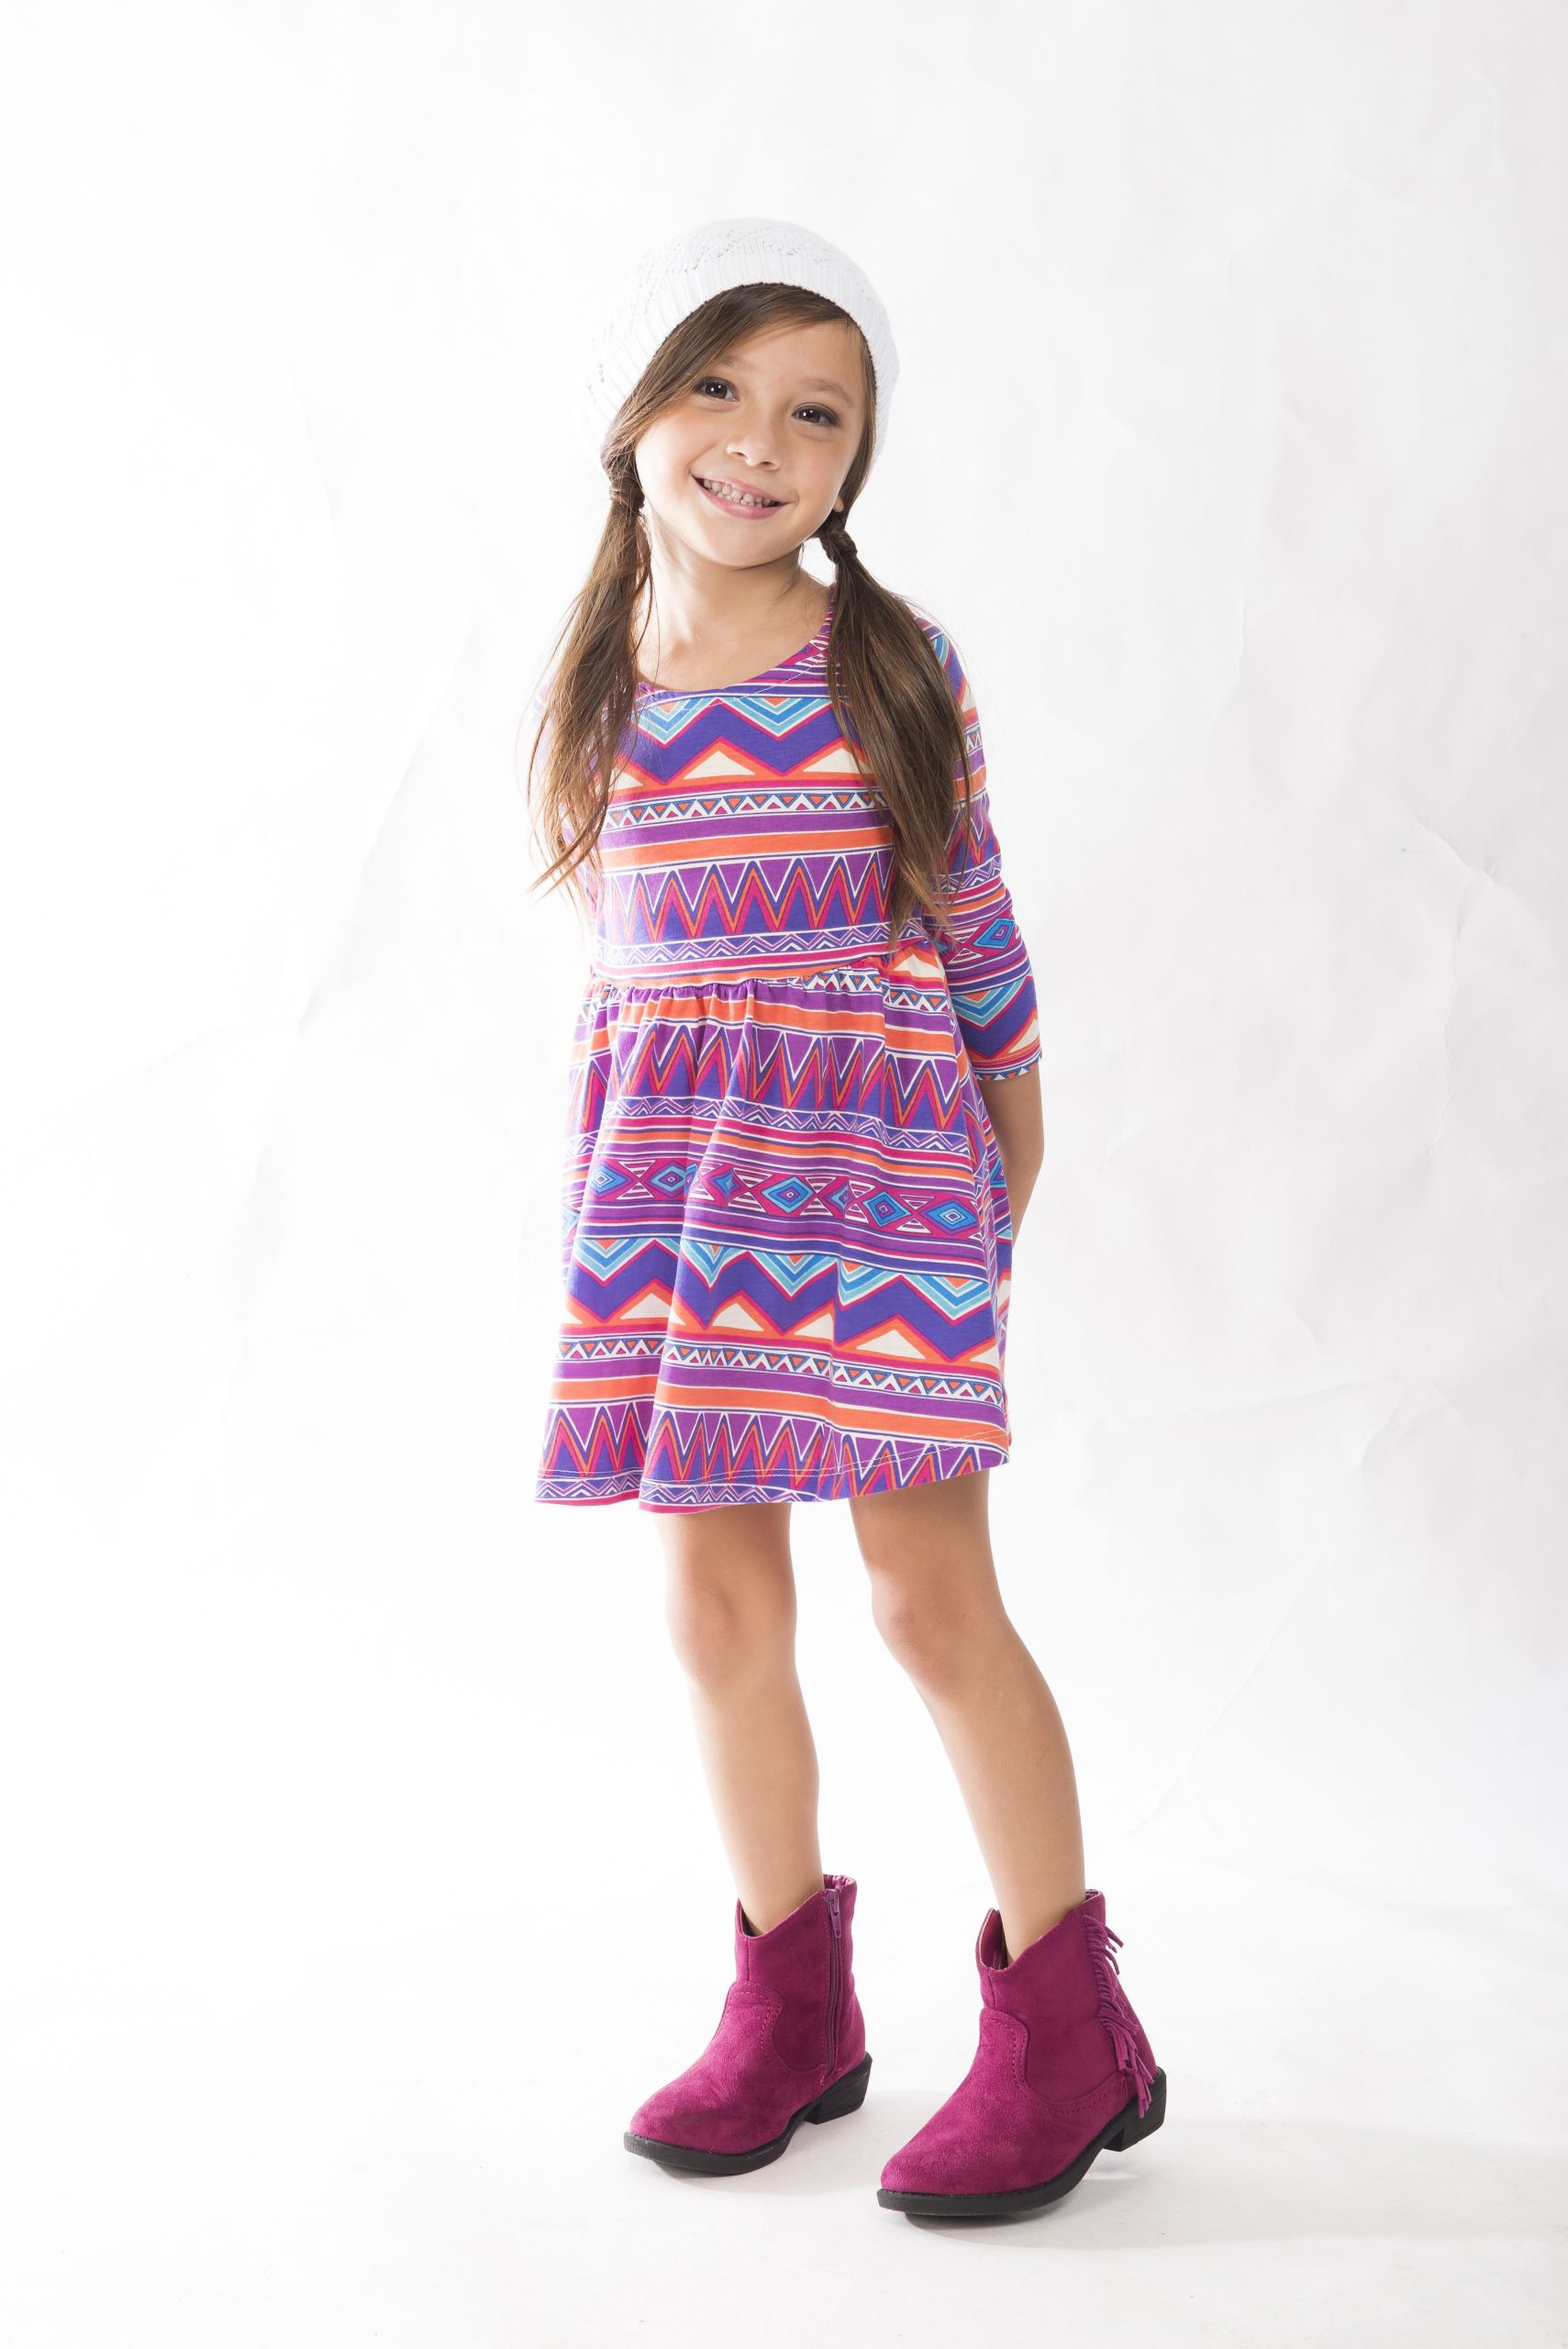 Kids Fashion
 Stylish Clothes Kids Love from FabKids